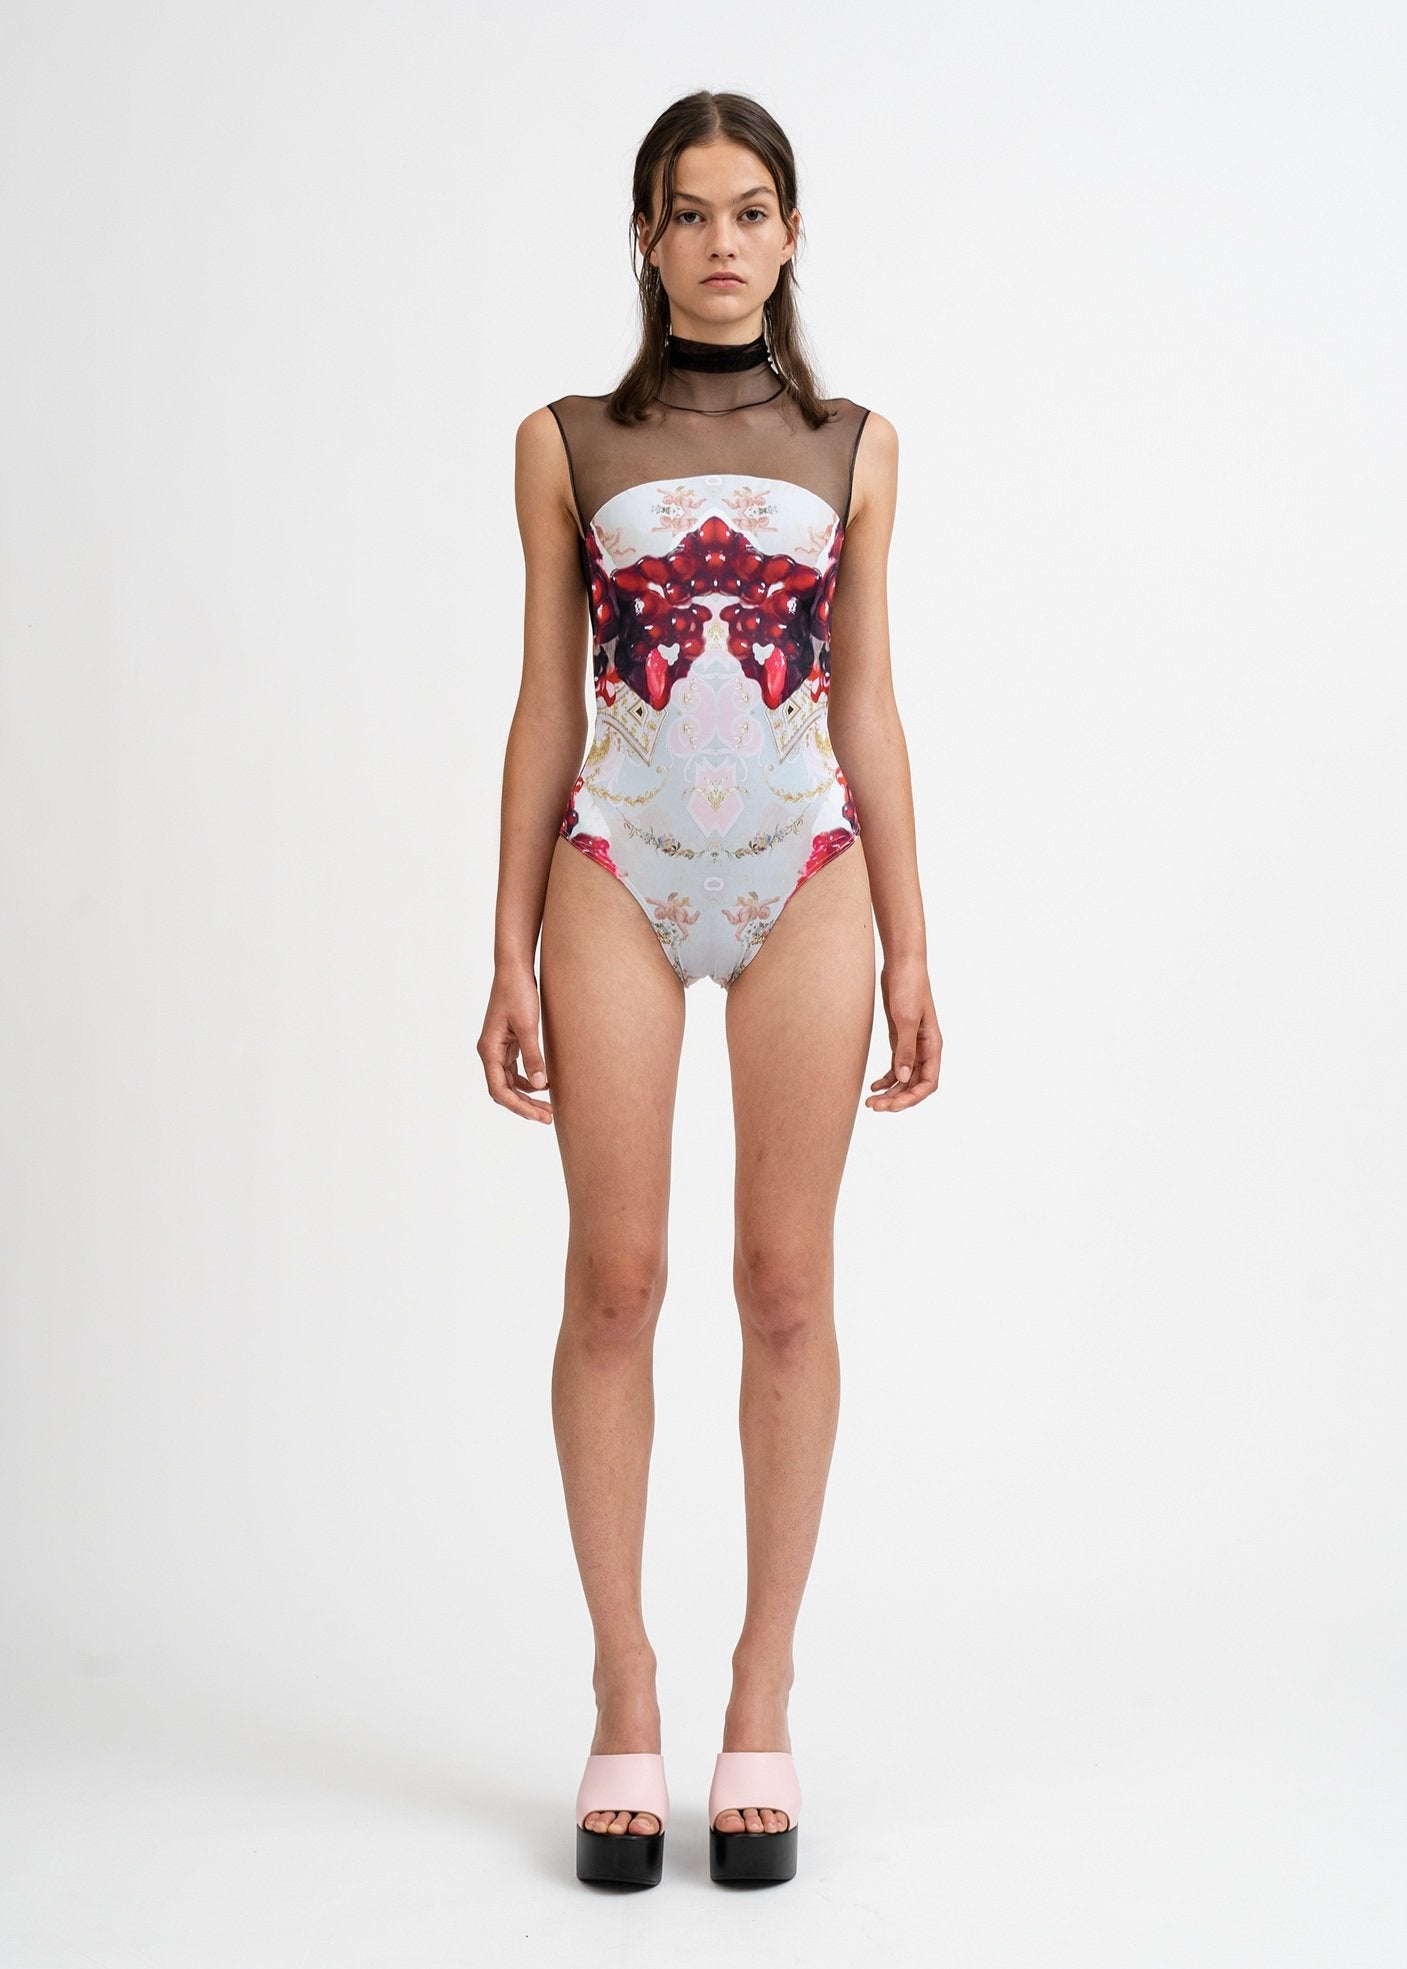 Maldire leotard in black high neck mesh and printed body from the collective dancewear